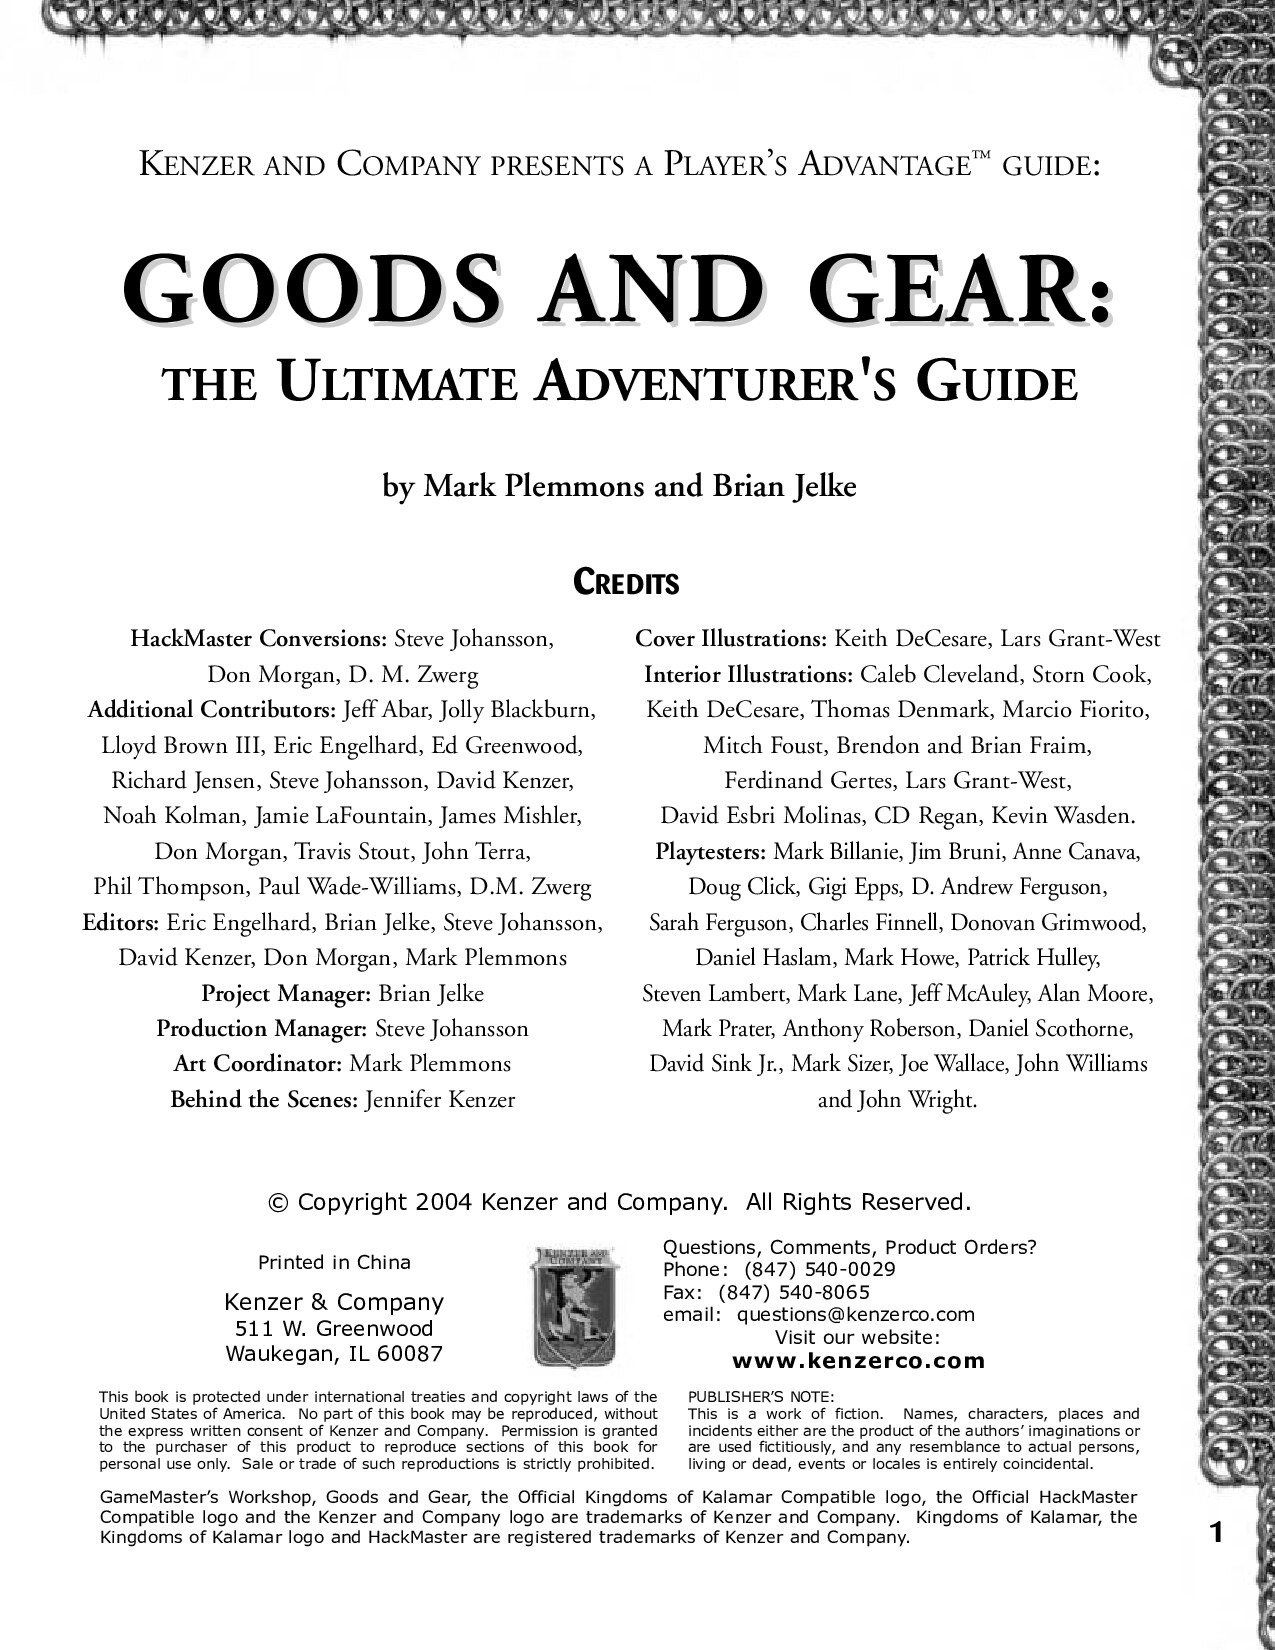 Goods And Gear. The Ultimate Adventurer's Guide